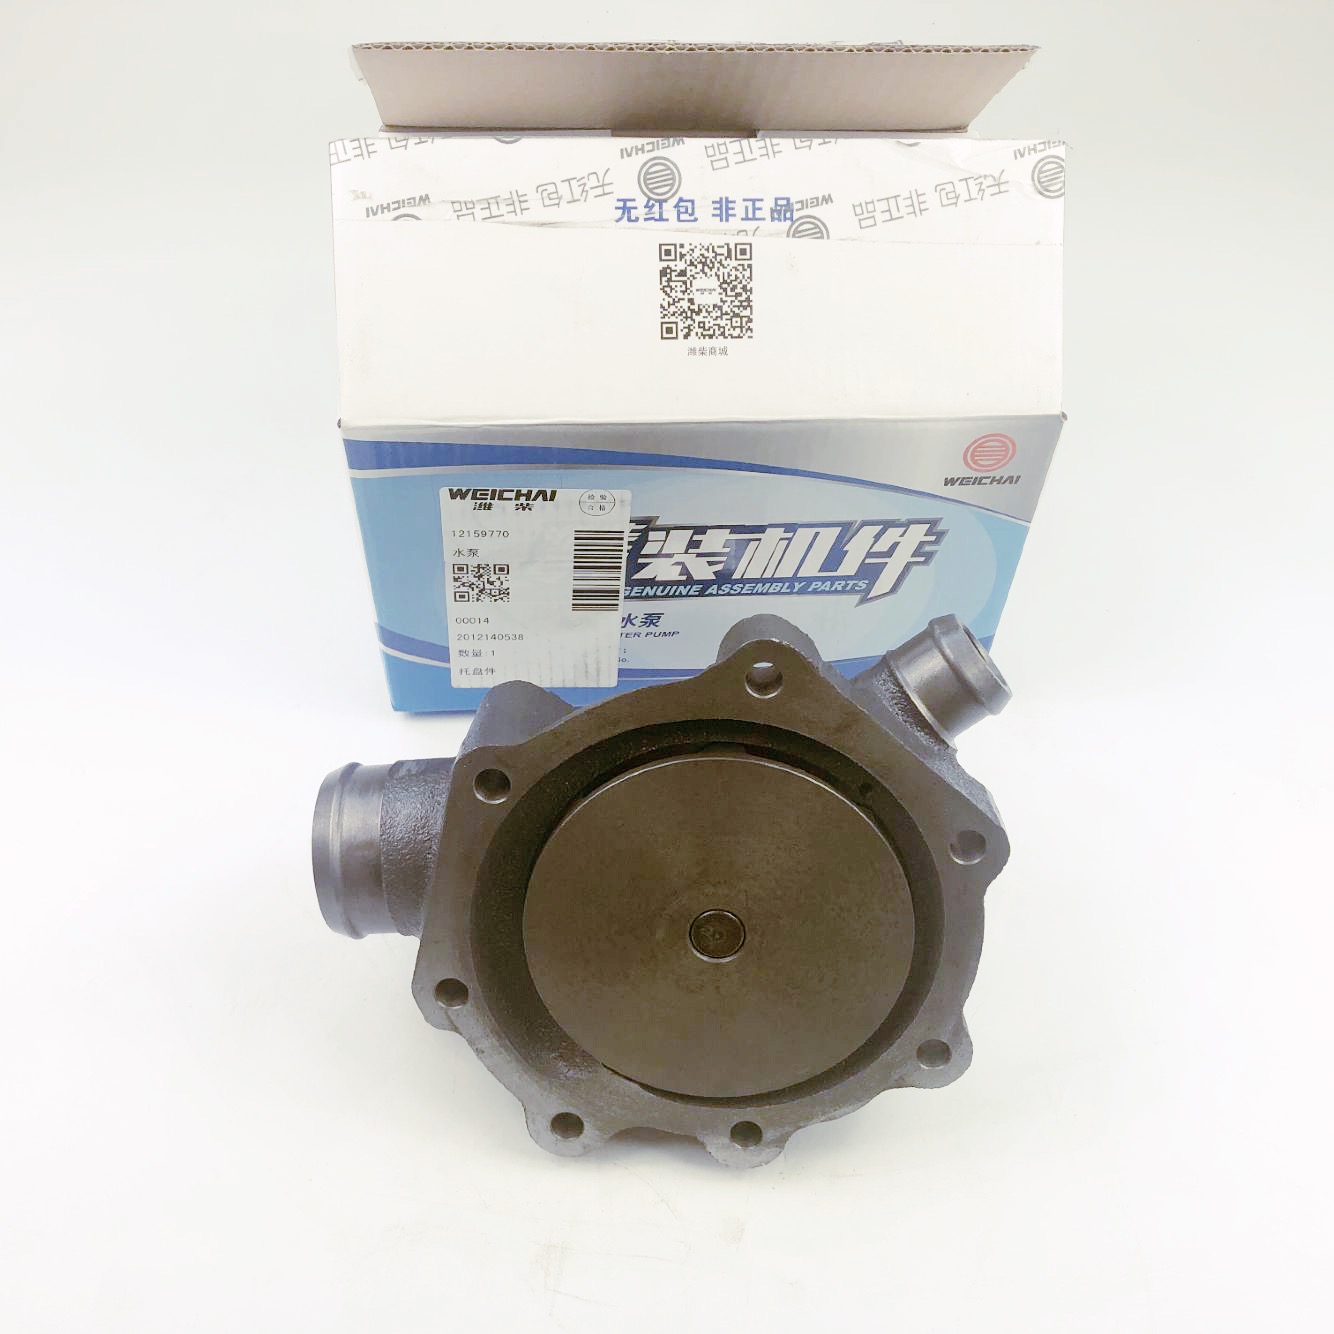 Genuine and Brand New Weichai WP6G125E201 Engine Spare Parts water pump 12159770